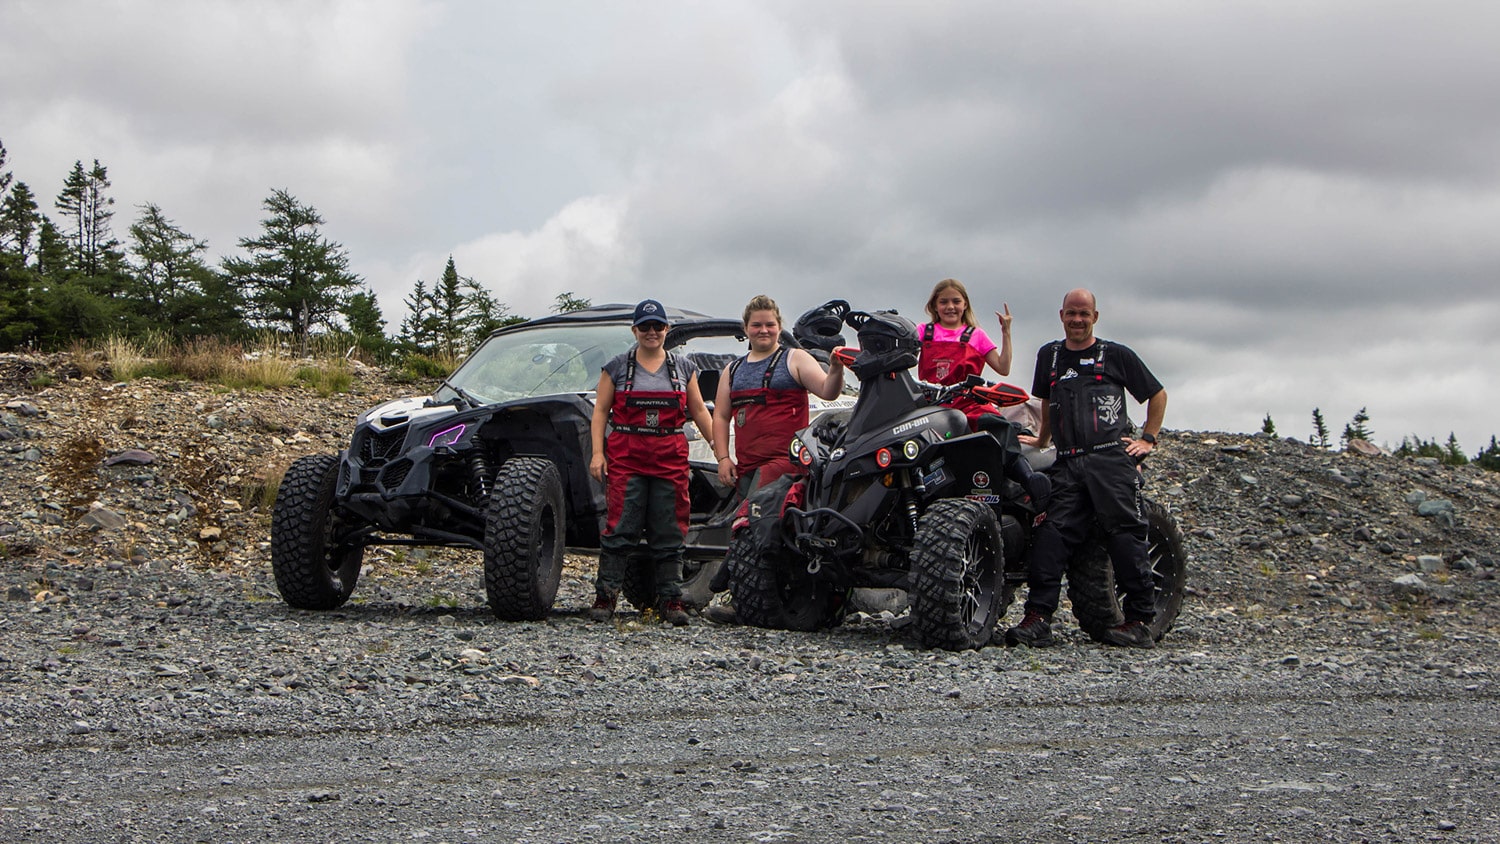 Youth ATV Riding Gear Every Kid Should Be Wearing